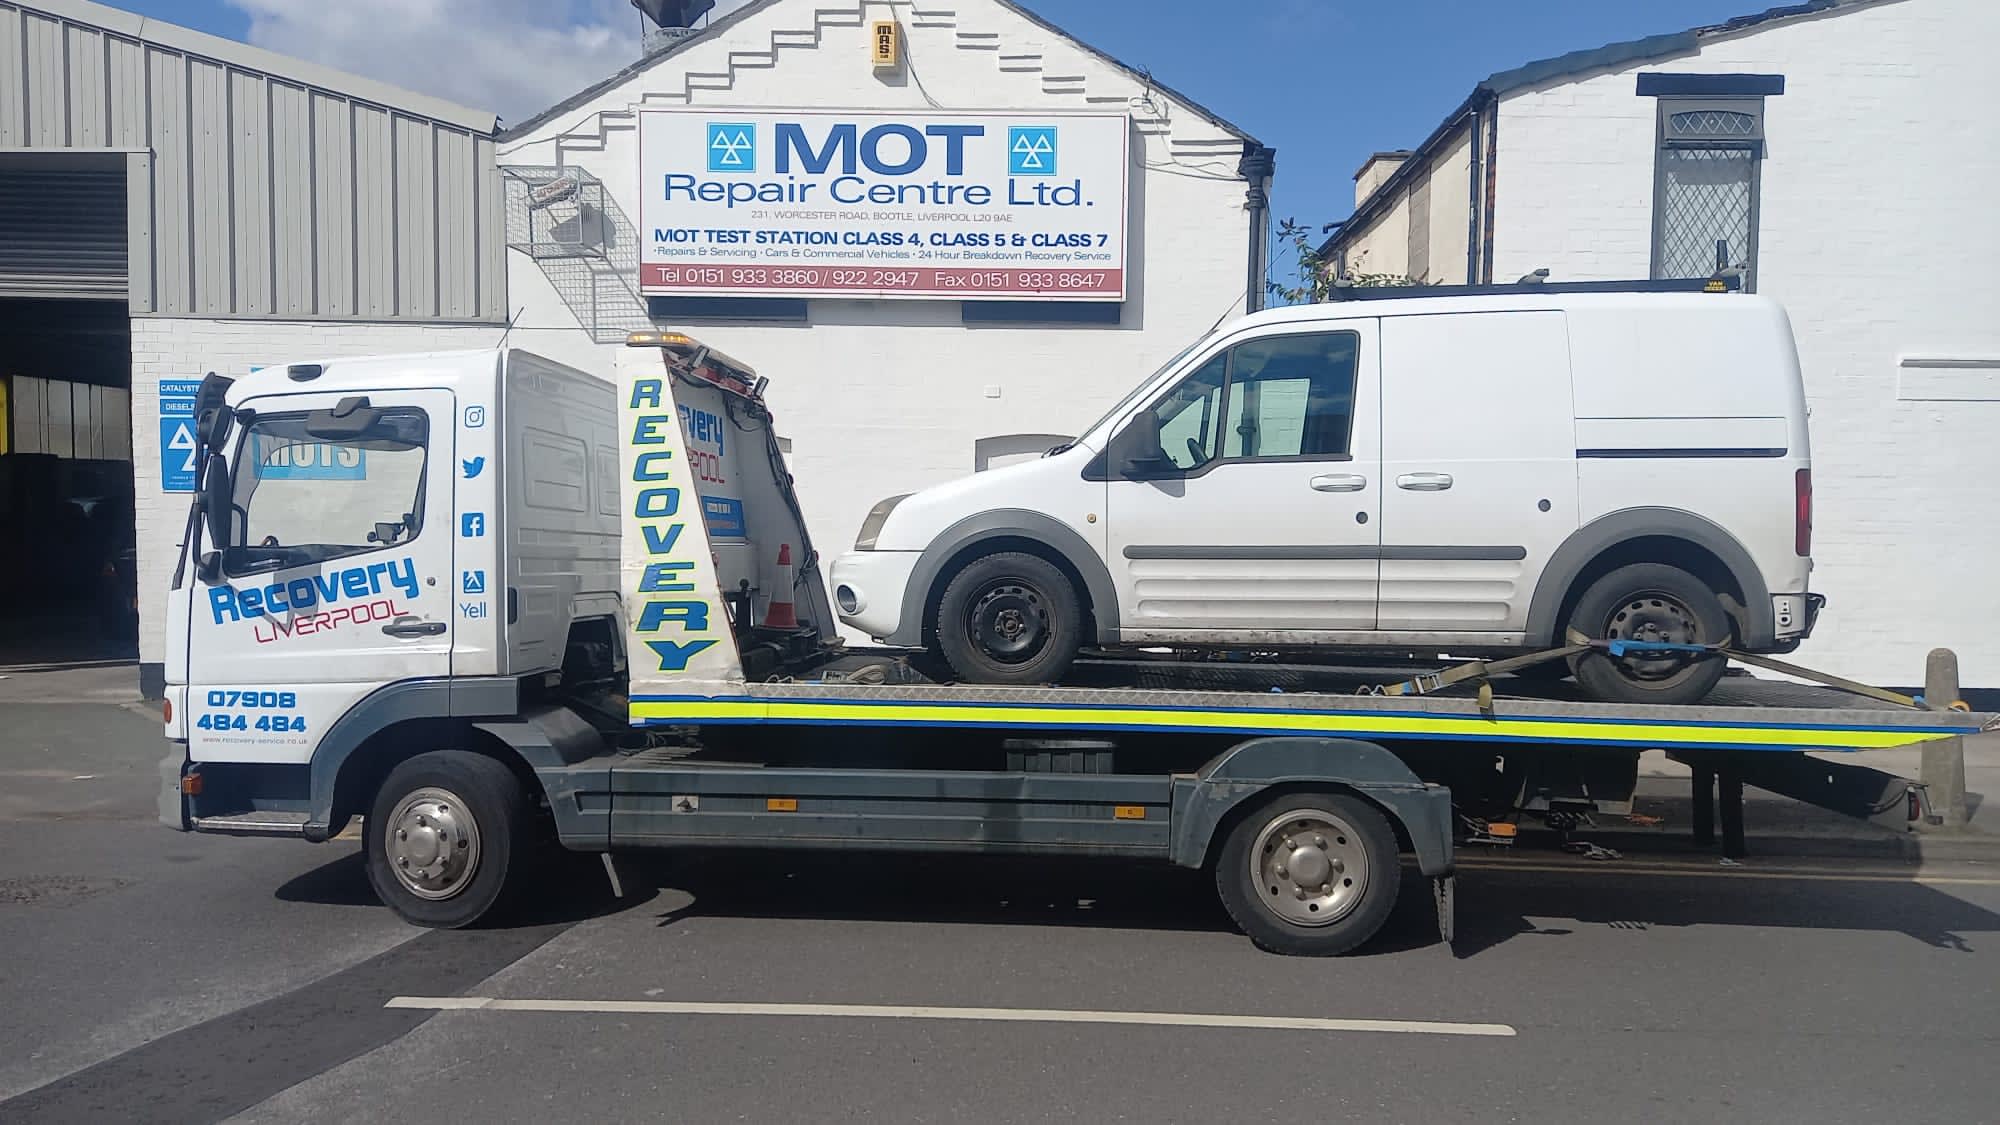 Images Recovery Liverpool Ltd